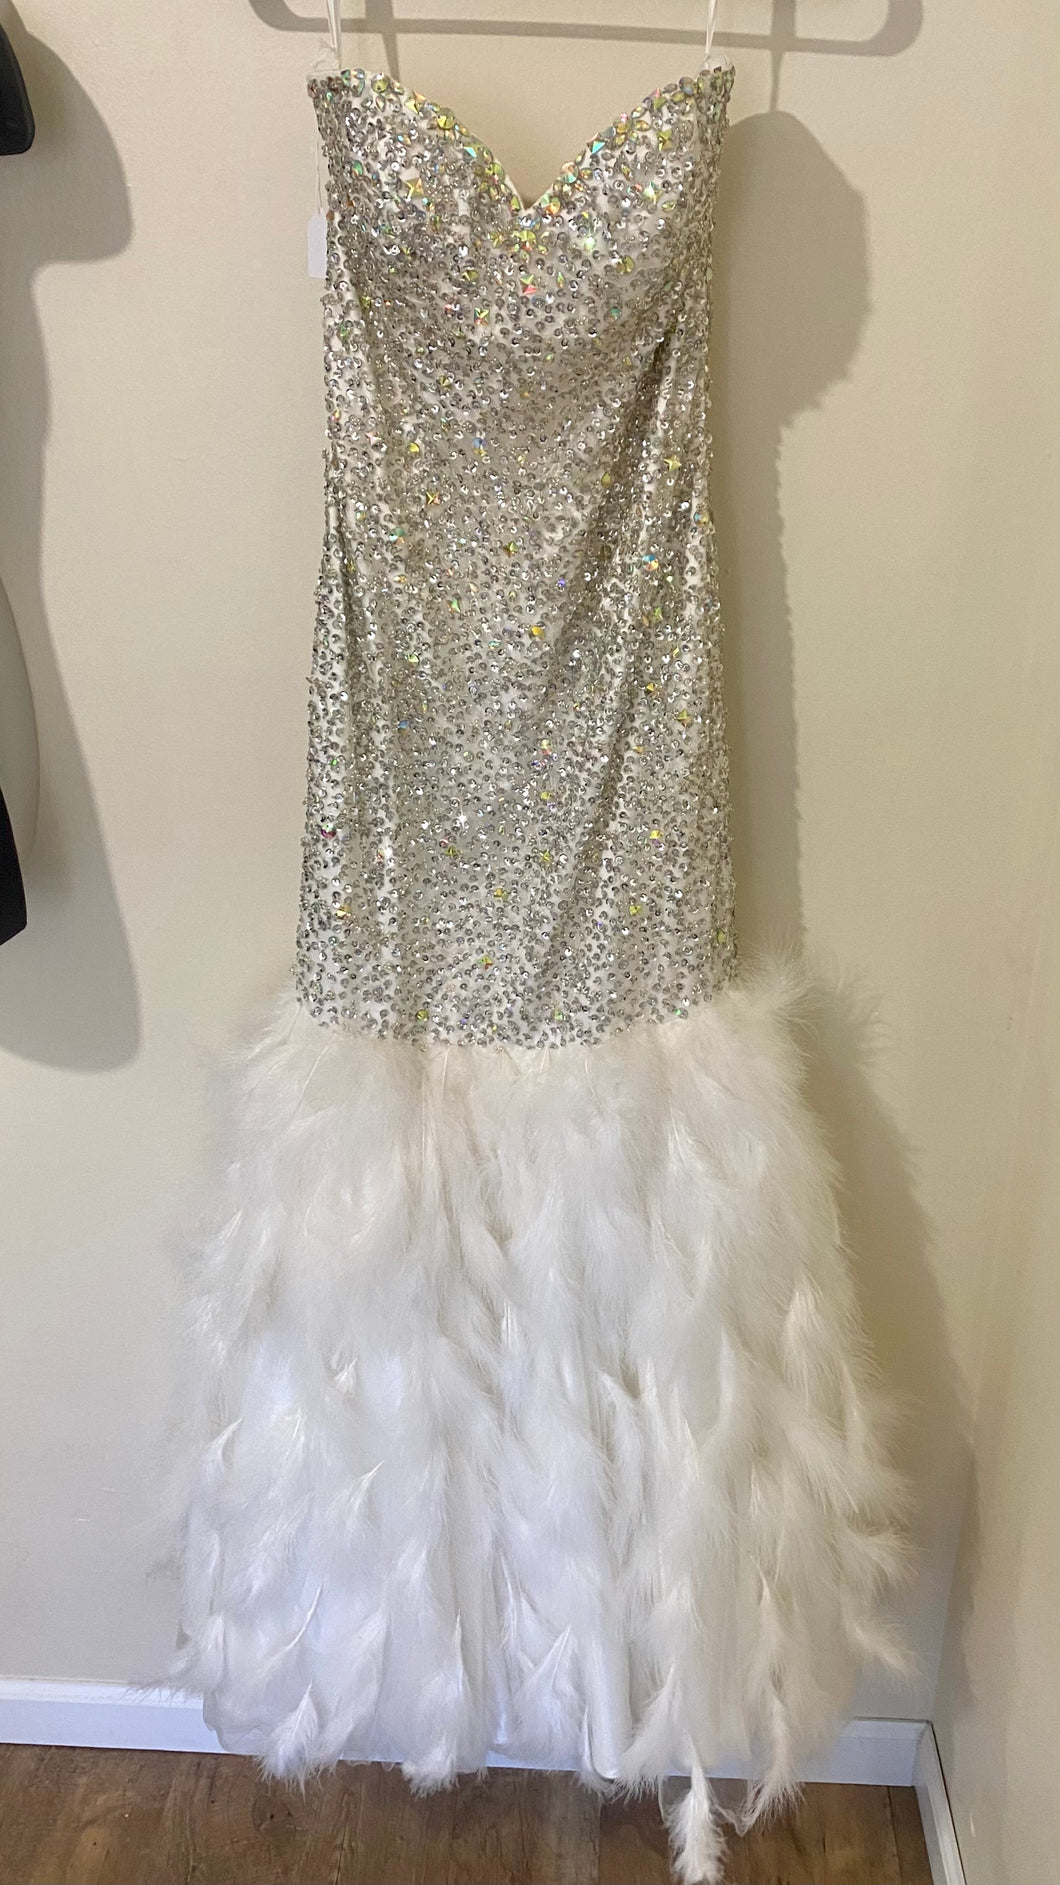 KRUG300-A Jovani White Feathered Gown, Size 6